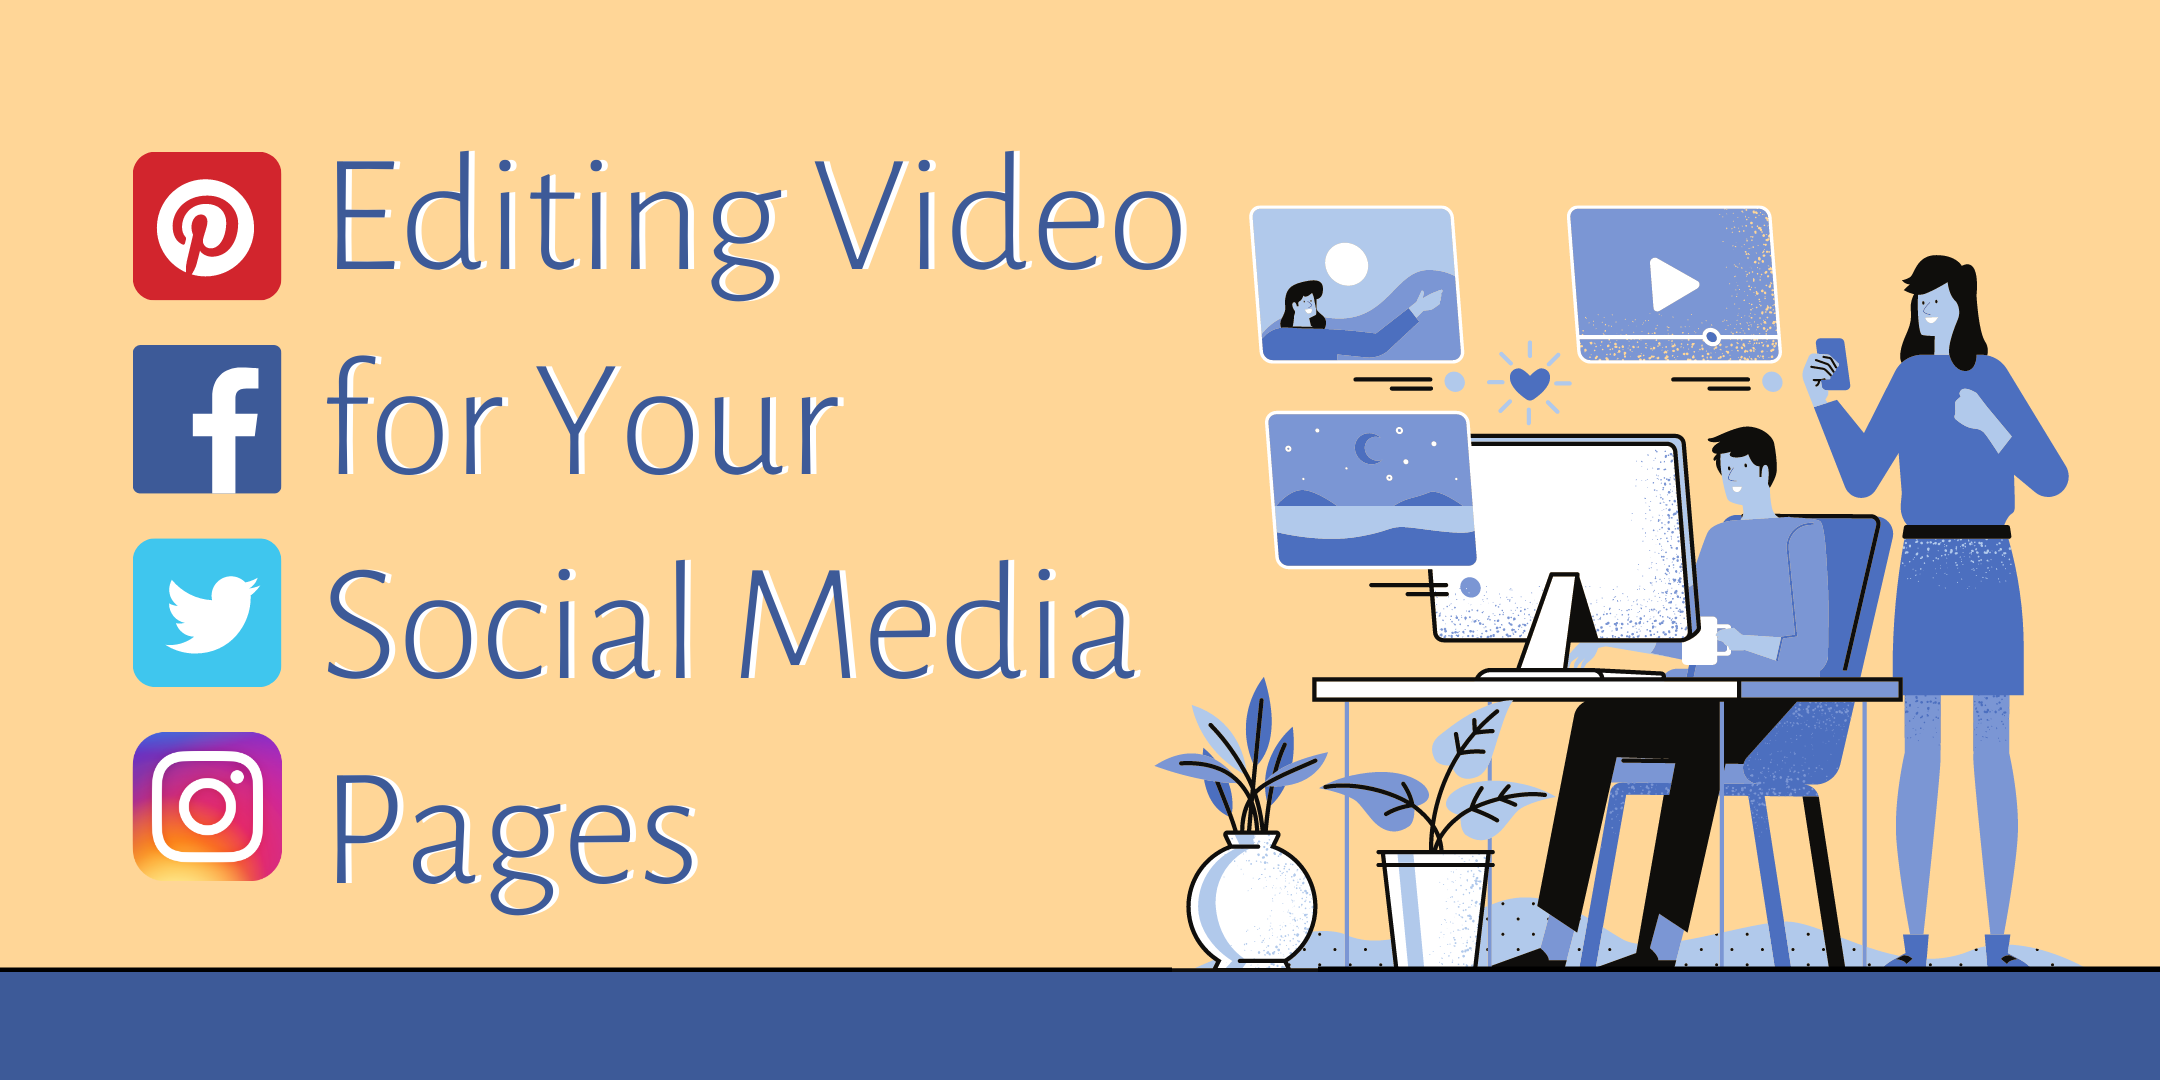 Editing Video for Your Social Media Pages